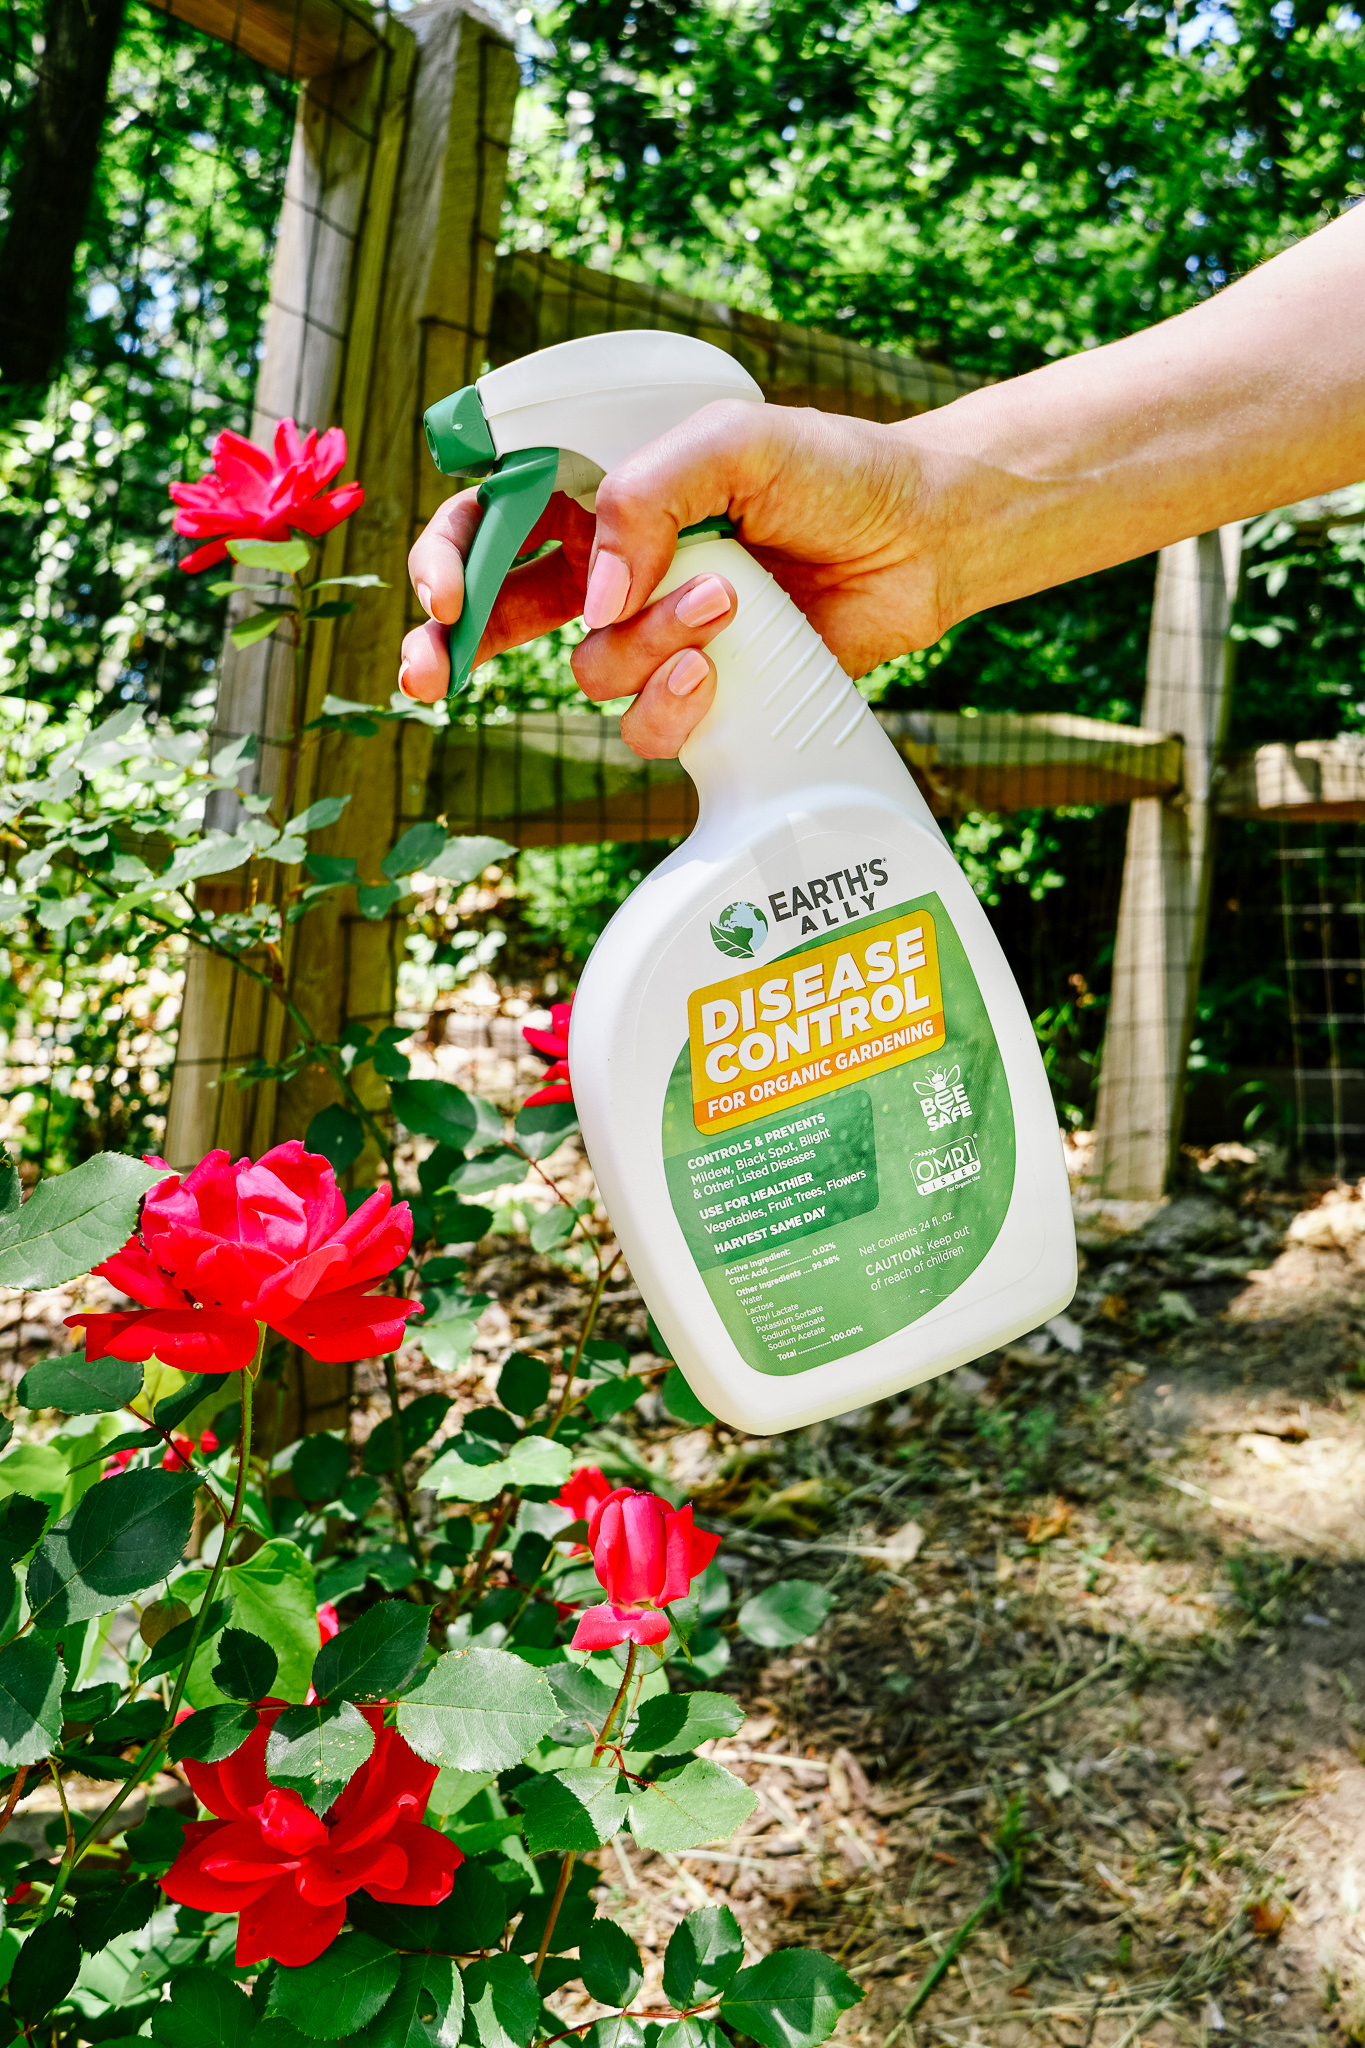 Earth's Ally Disease Control: A non-toxic product for indoor and outdoor plants